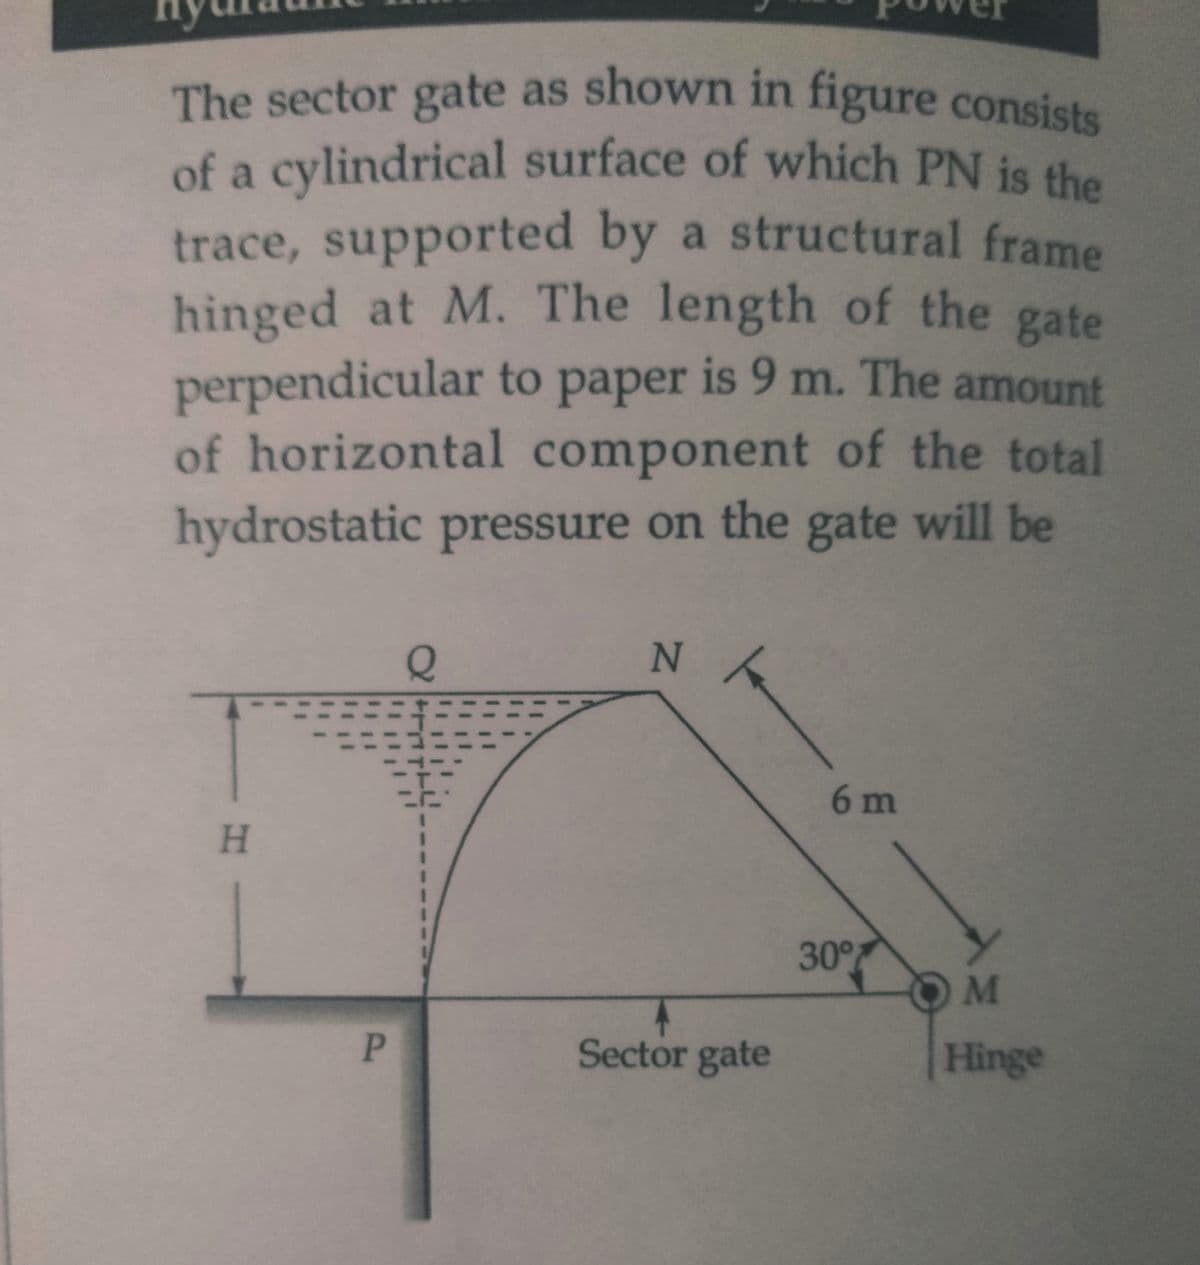 of a cylindrical surface of which PN is the
The sector gate as shown in figure consists
The sector gate as shown in figure consiste
trace, supported by a structural frame
hinged at M. The length of the gate
perpendicular to paper is 9 m. The amount
of horizontal component of the total
hydrostatic pressure on the gate will be
6 m
H.
3D
3D
%3D
30°
P
Sector gate
Hinge
N'
